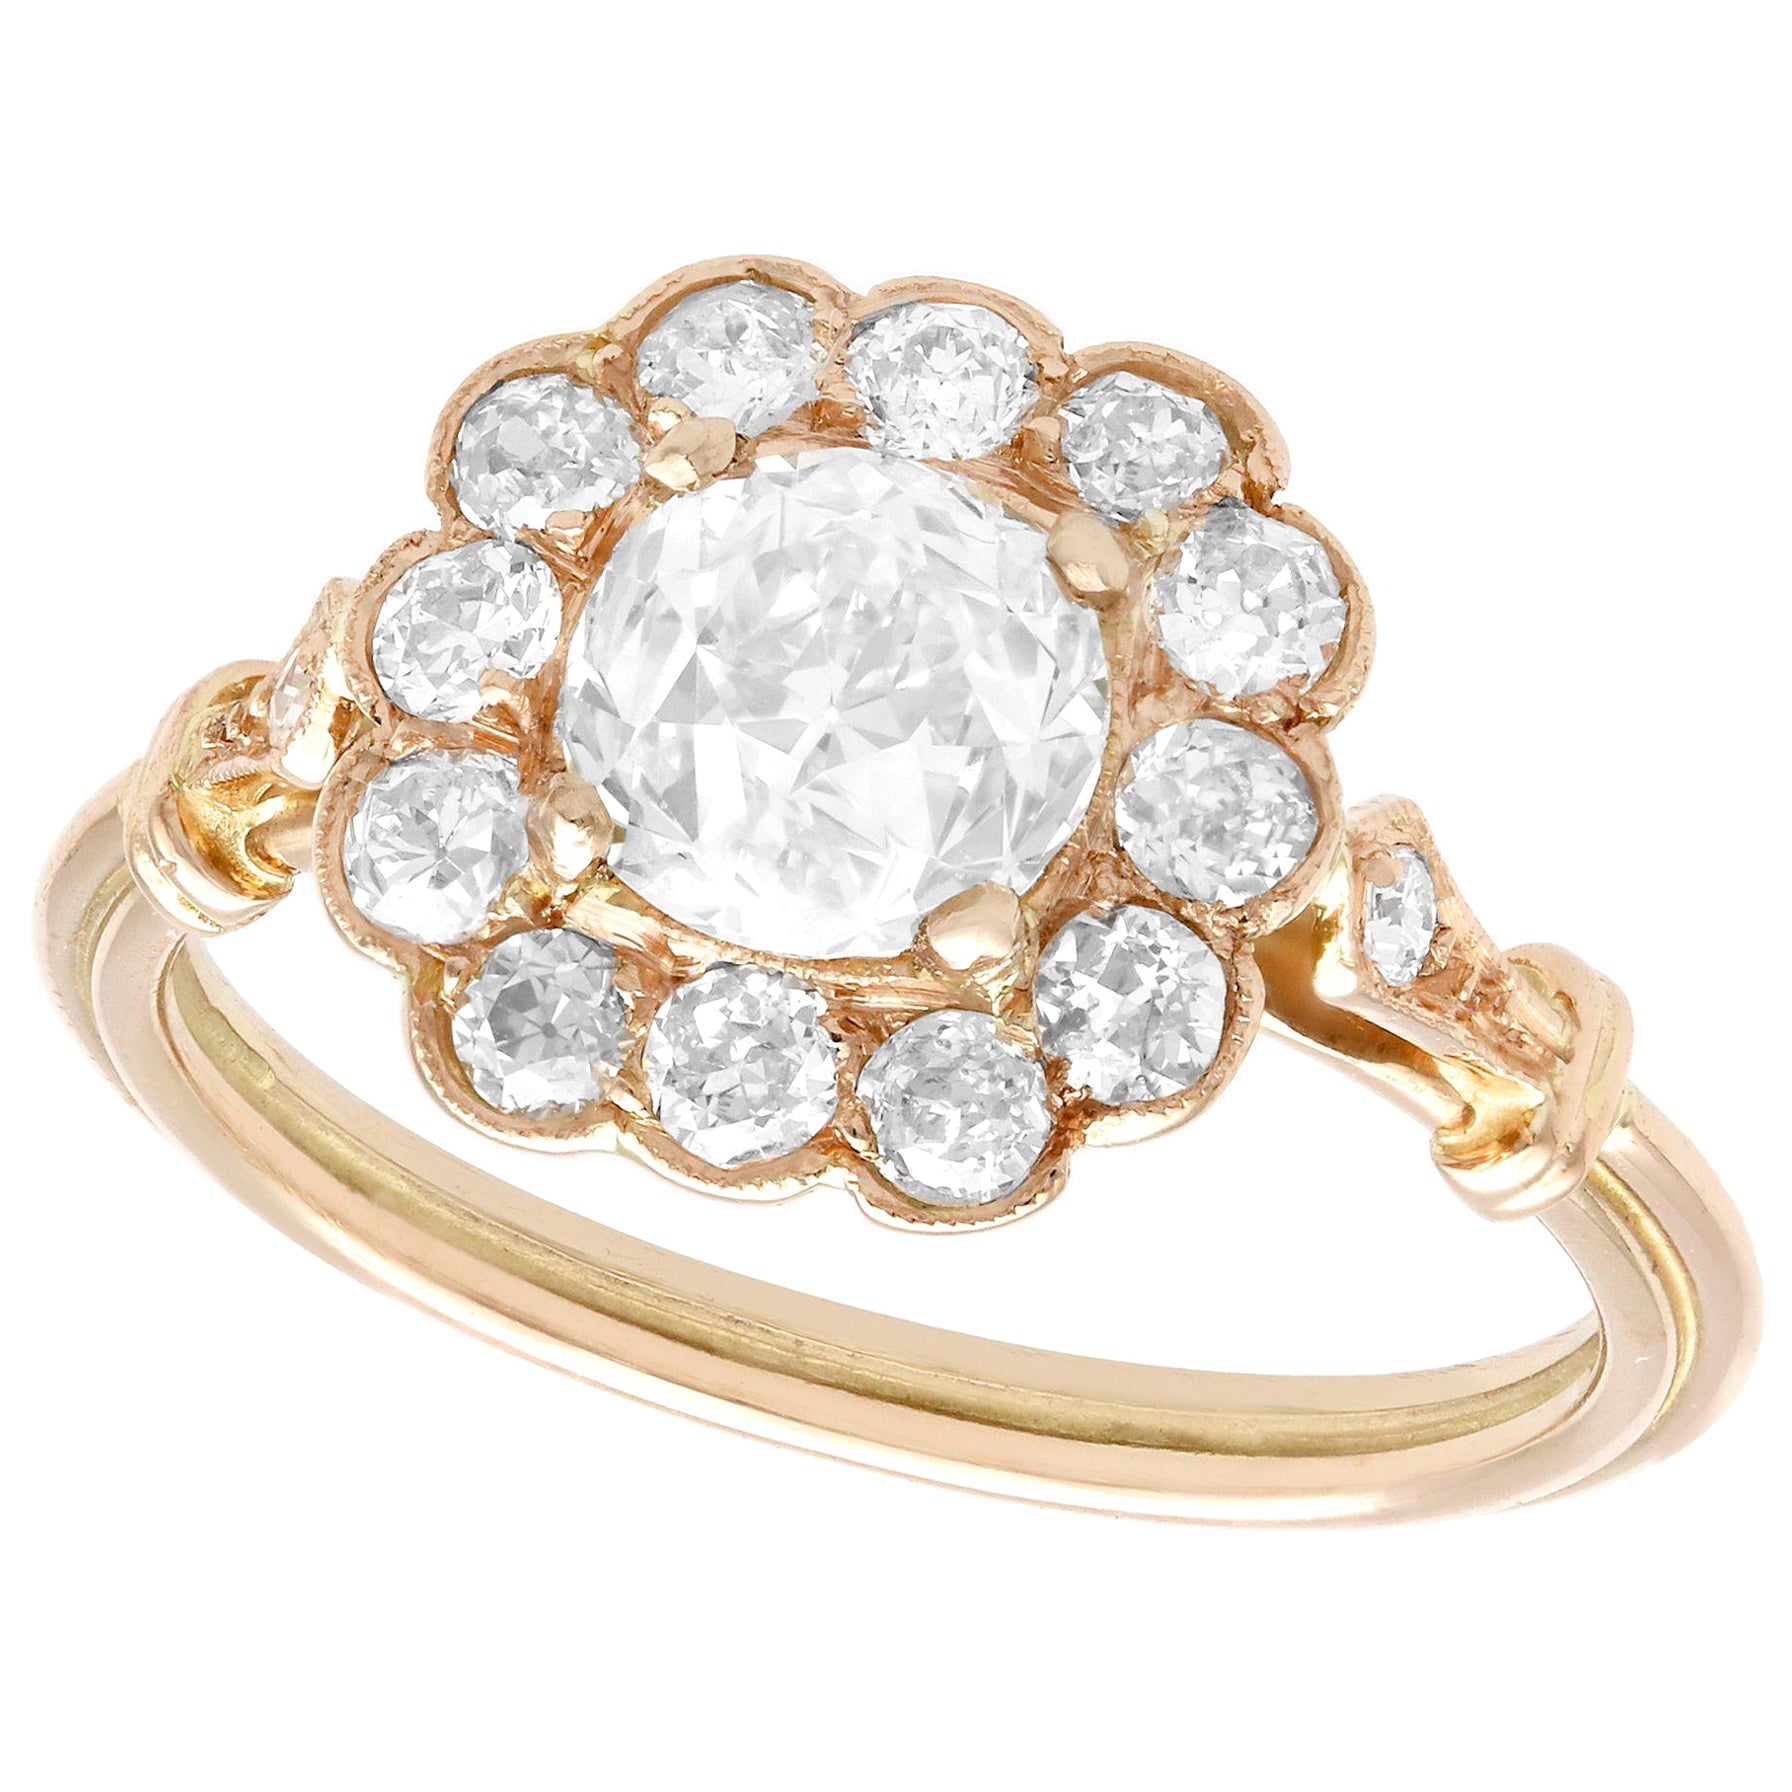 1.69 Carat Diamond and Rose Gold Gold Cluster Engagement Ring